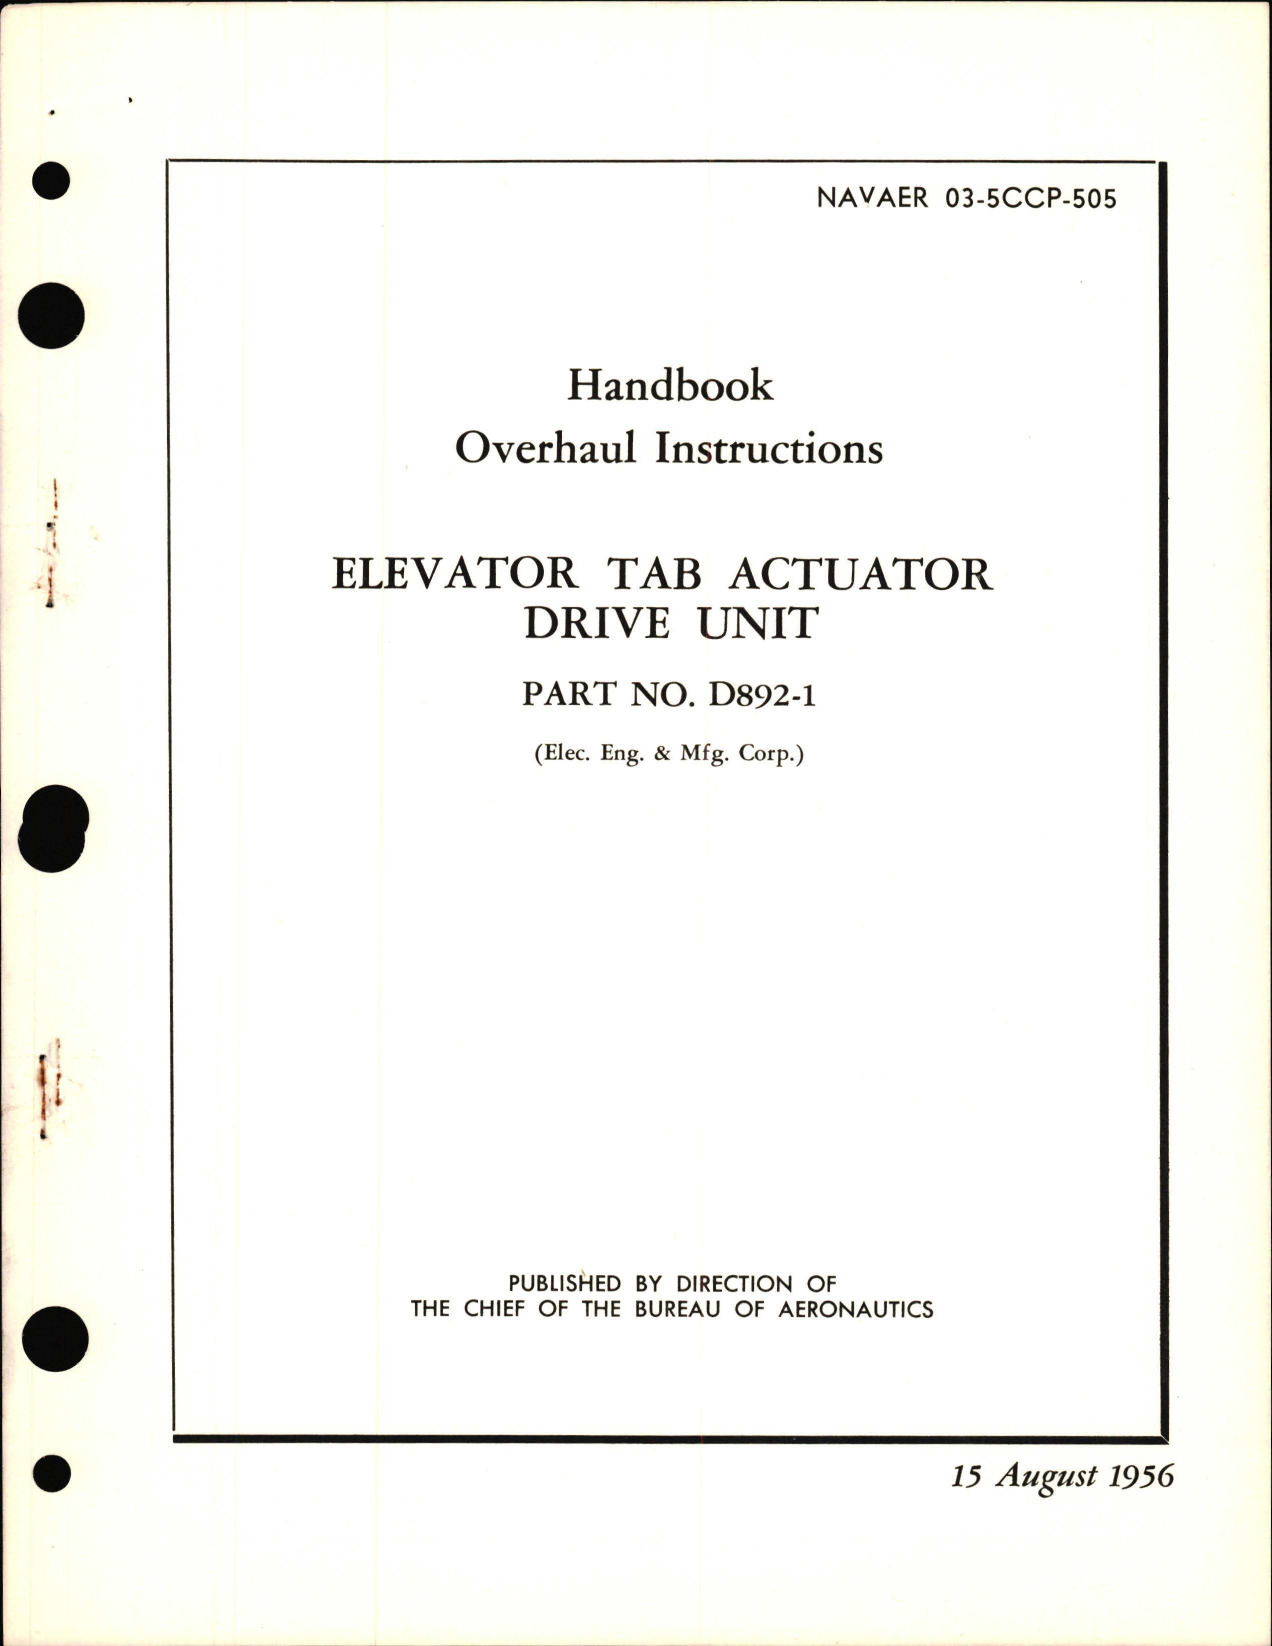 Sample page 5 from AirCorps Library document: Overhaul Instructions for Elevator Drive Unit - Part D892-1 